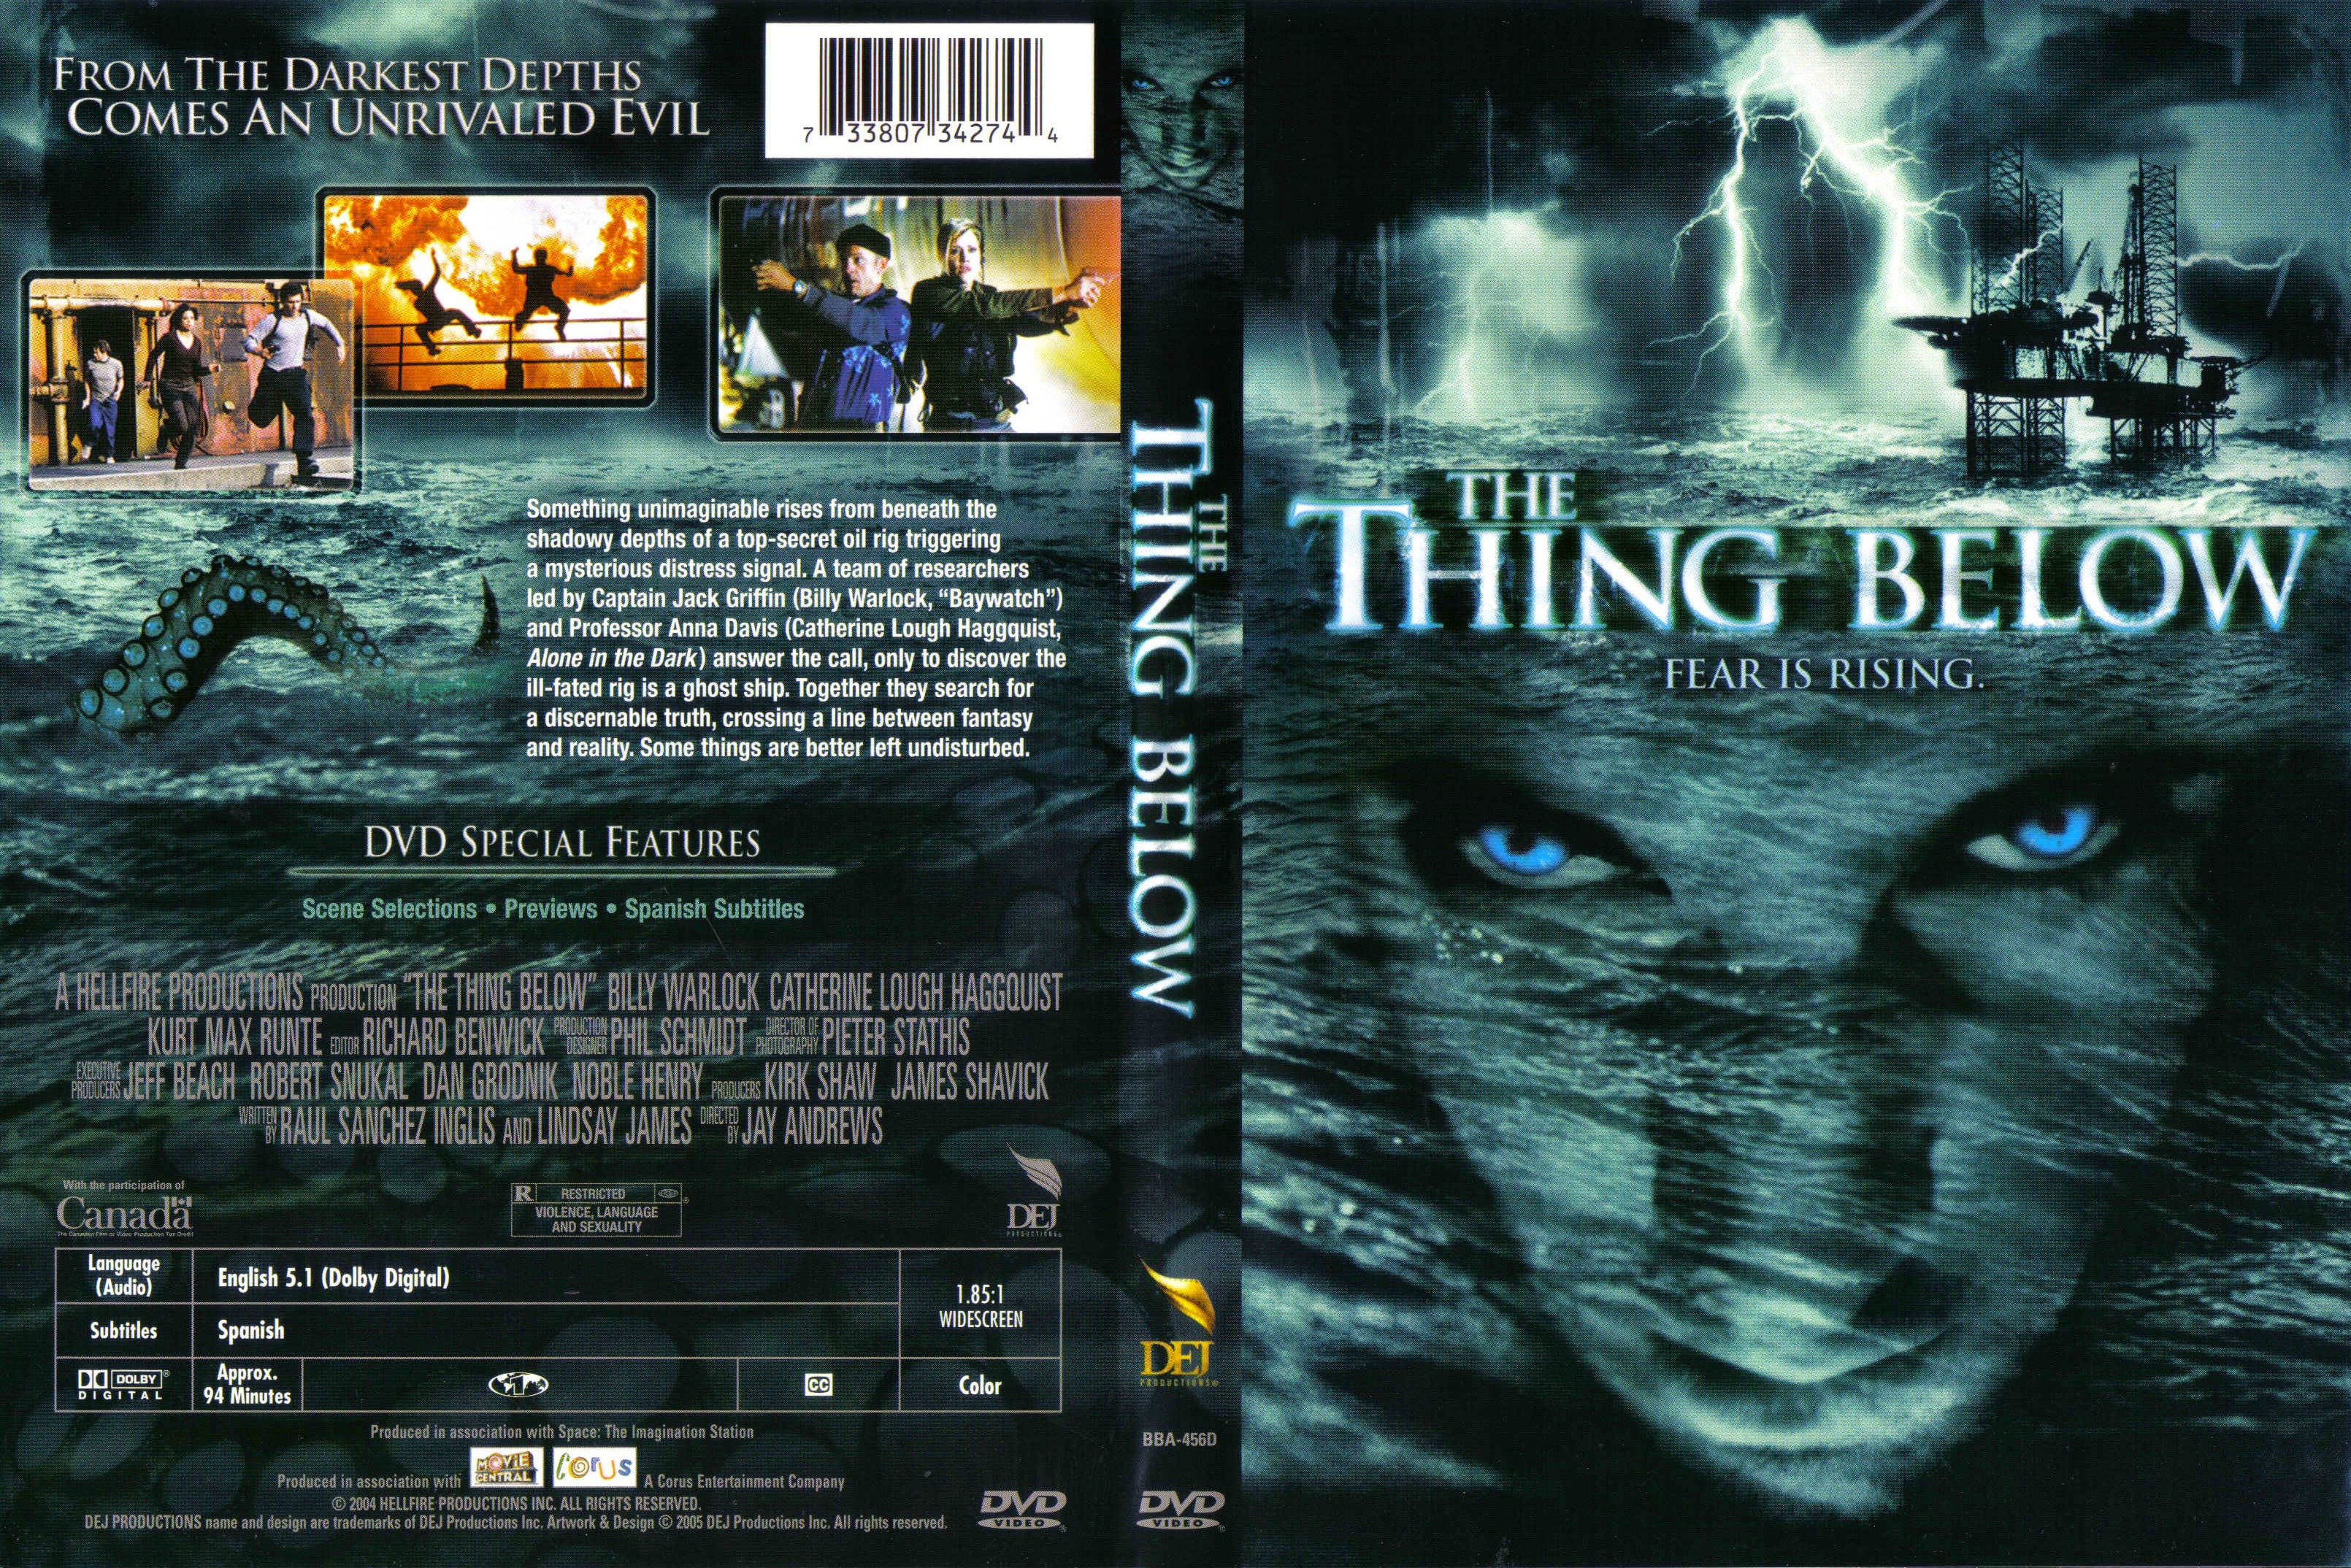 Jaquette DVD The thing below Zone 1